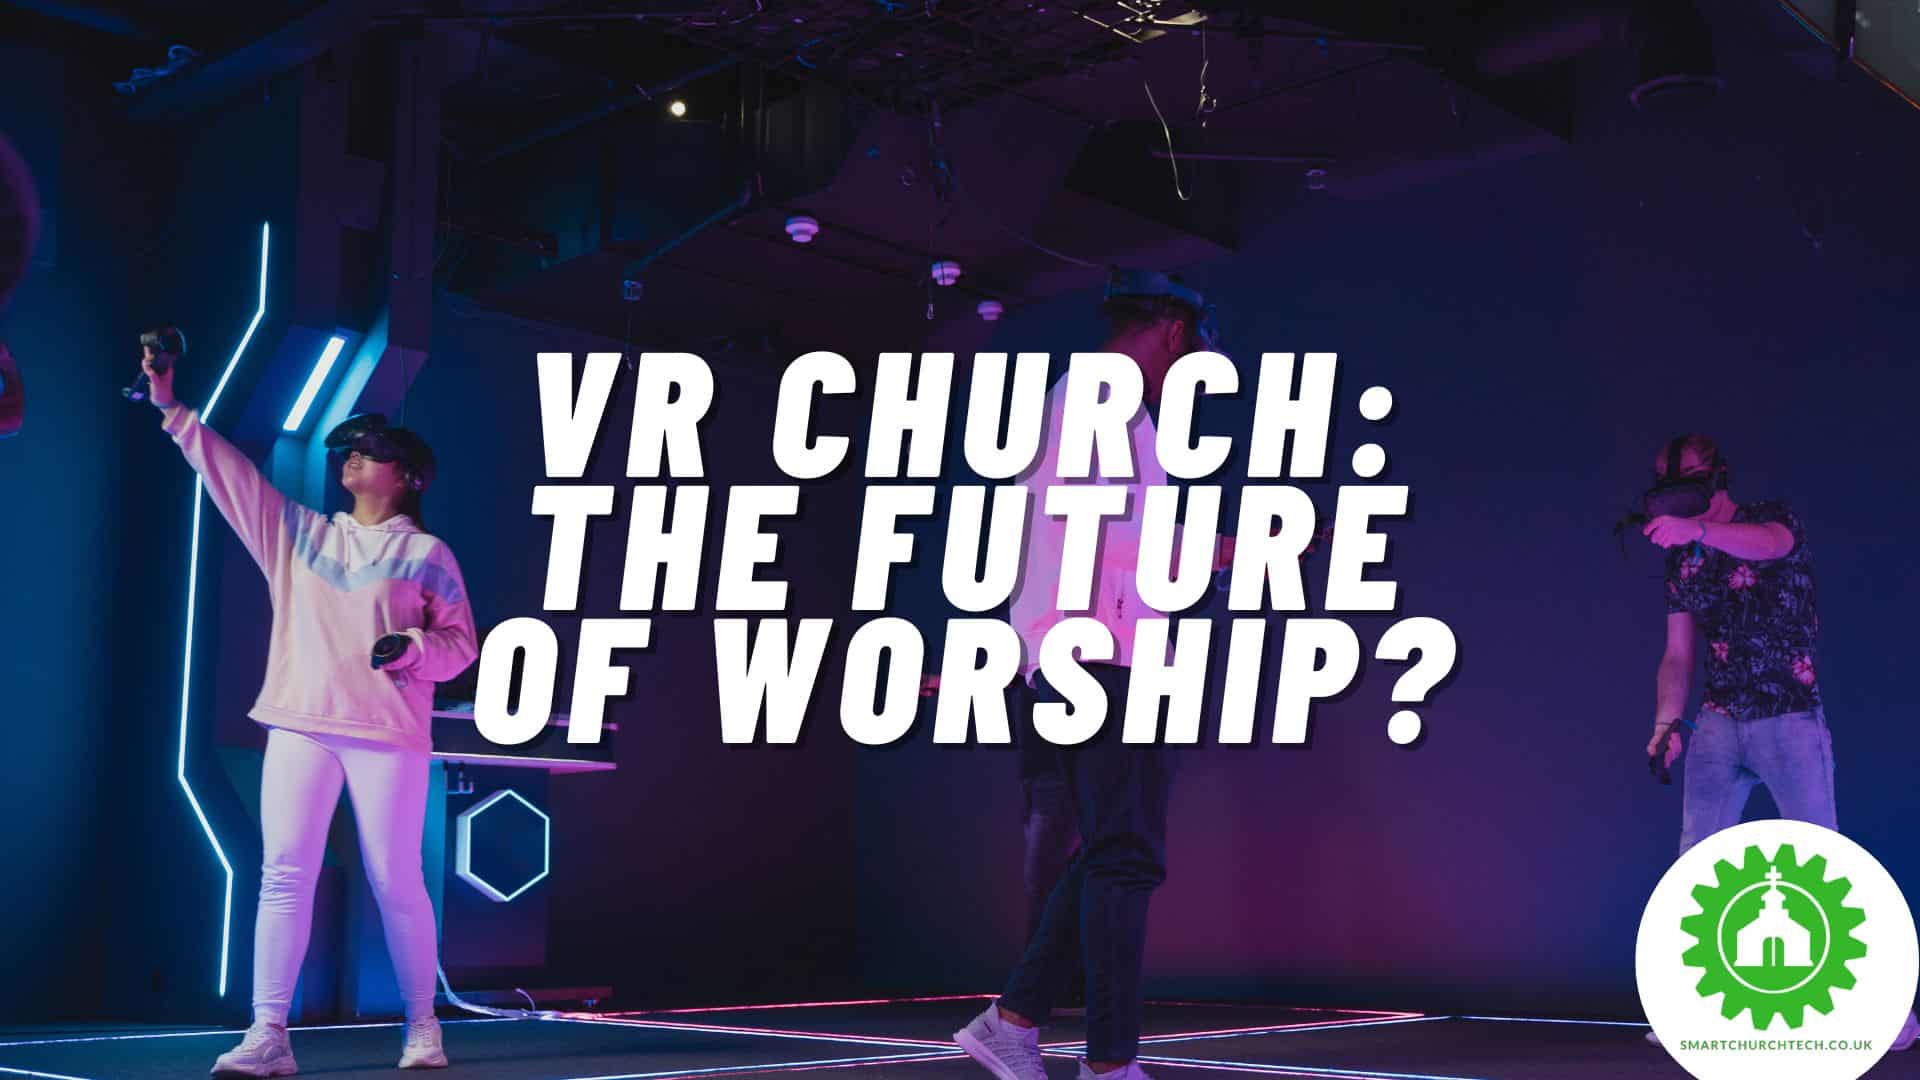 Virtual Reality Church Services: The Future of Worship?